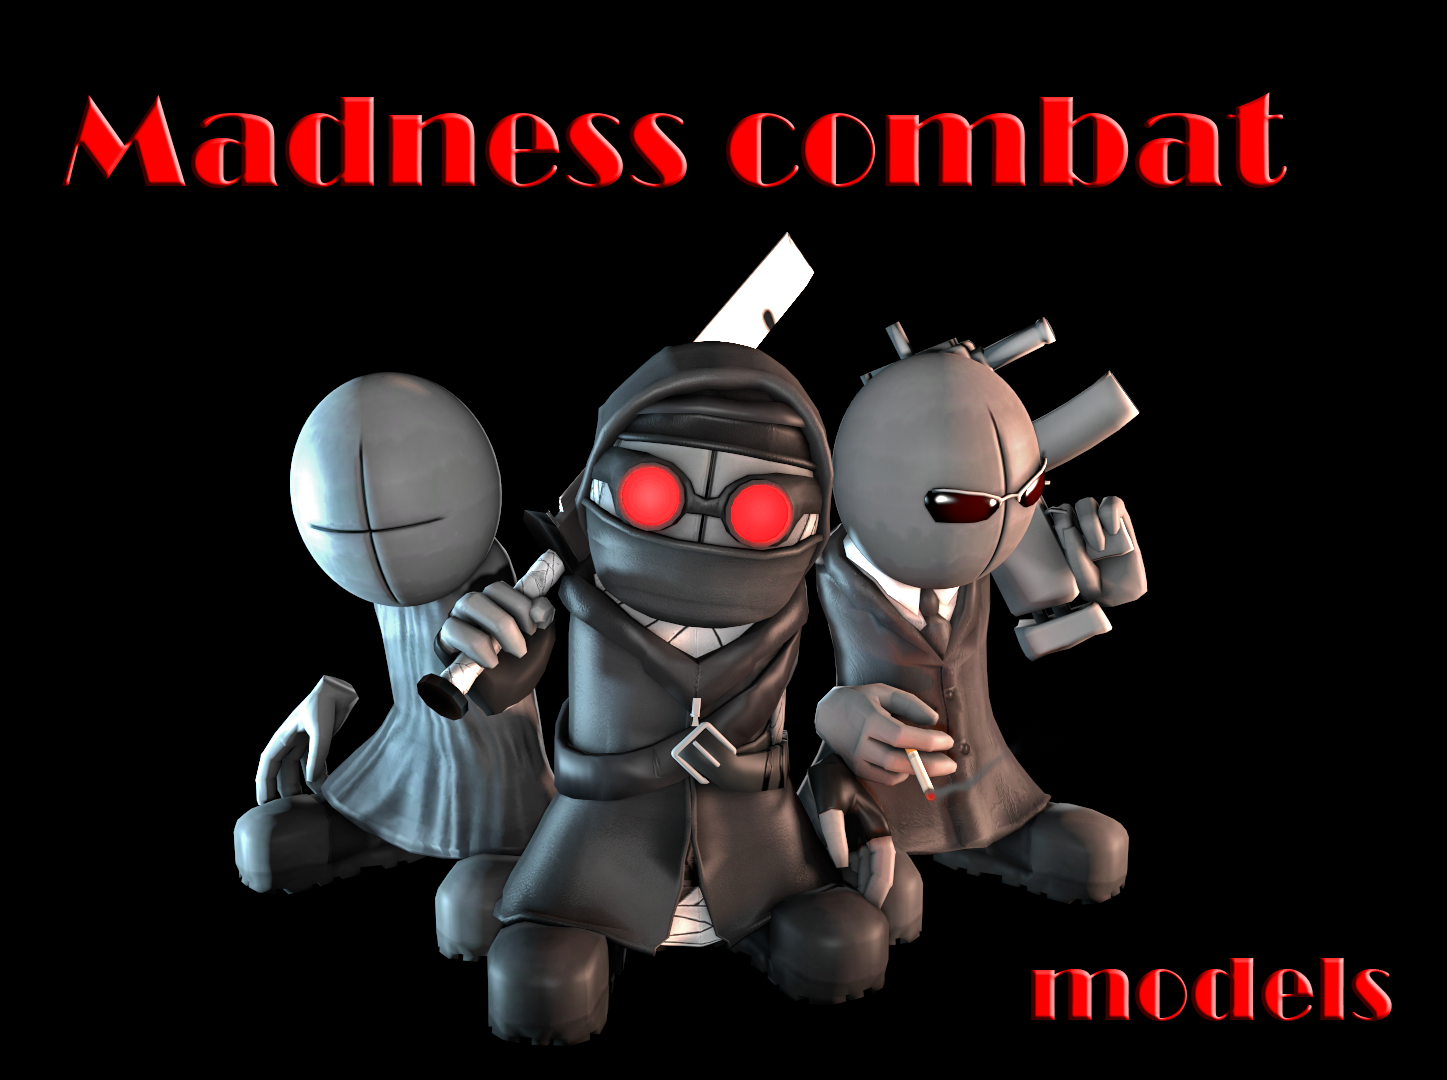 Madness combat model pack - Tricky the Clown by PointPony on DeviantArt